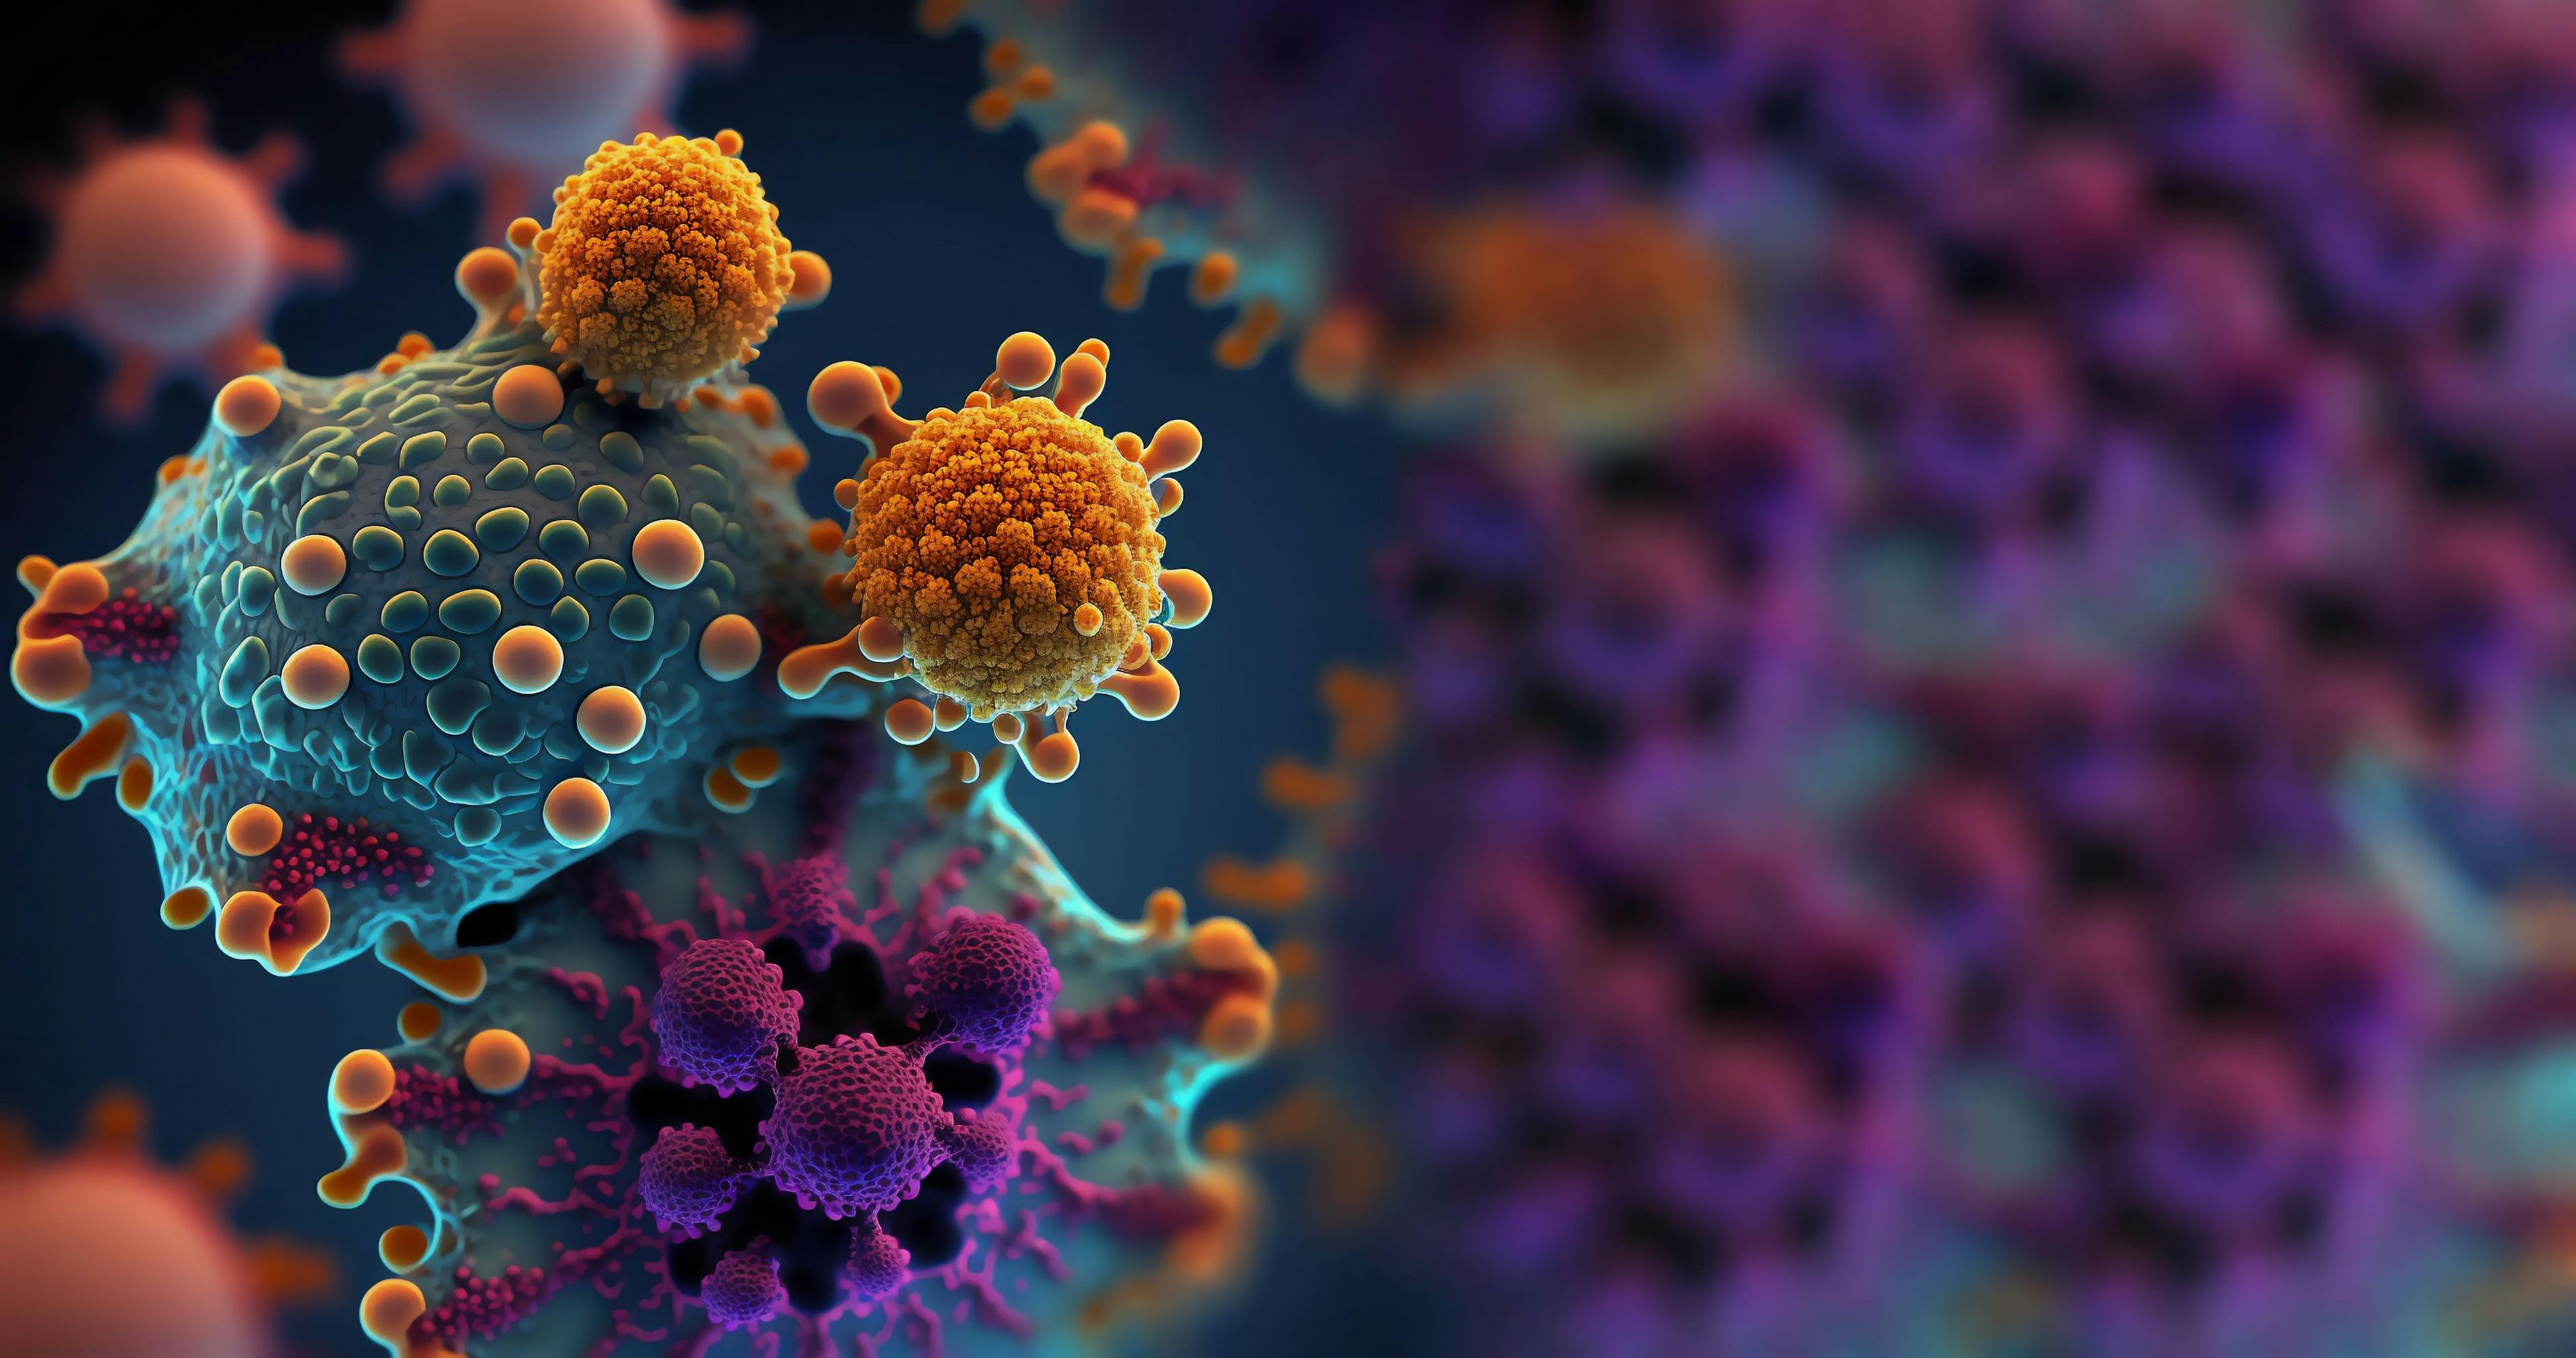 Chimeric antigen receptor CAR - car T-Cell therapy, CAR T-cell therapy is the use of genetically modified T cells that express a special protein called a chimeric antigen receptor 3d rendering | Image Credit: © catalin - [stock.adobe.com]